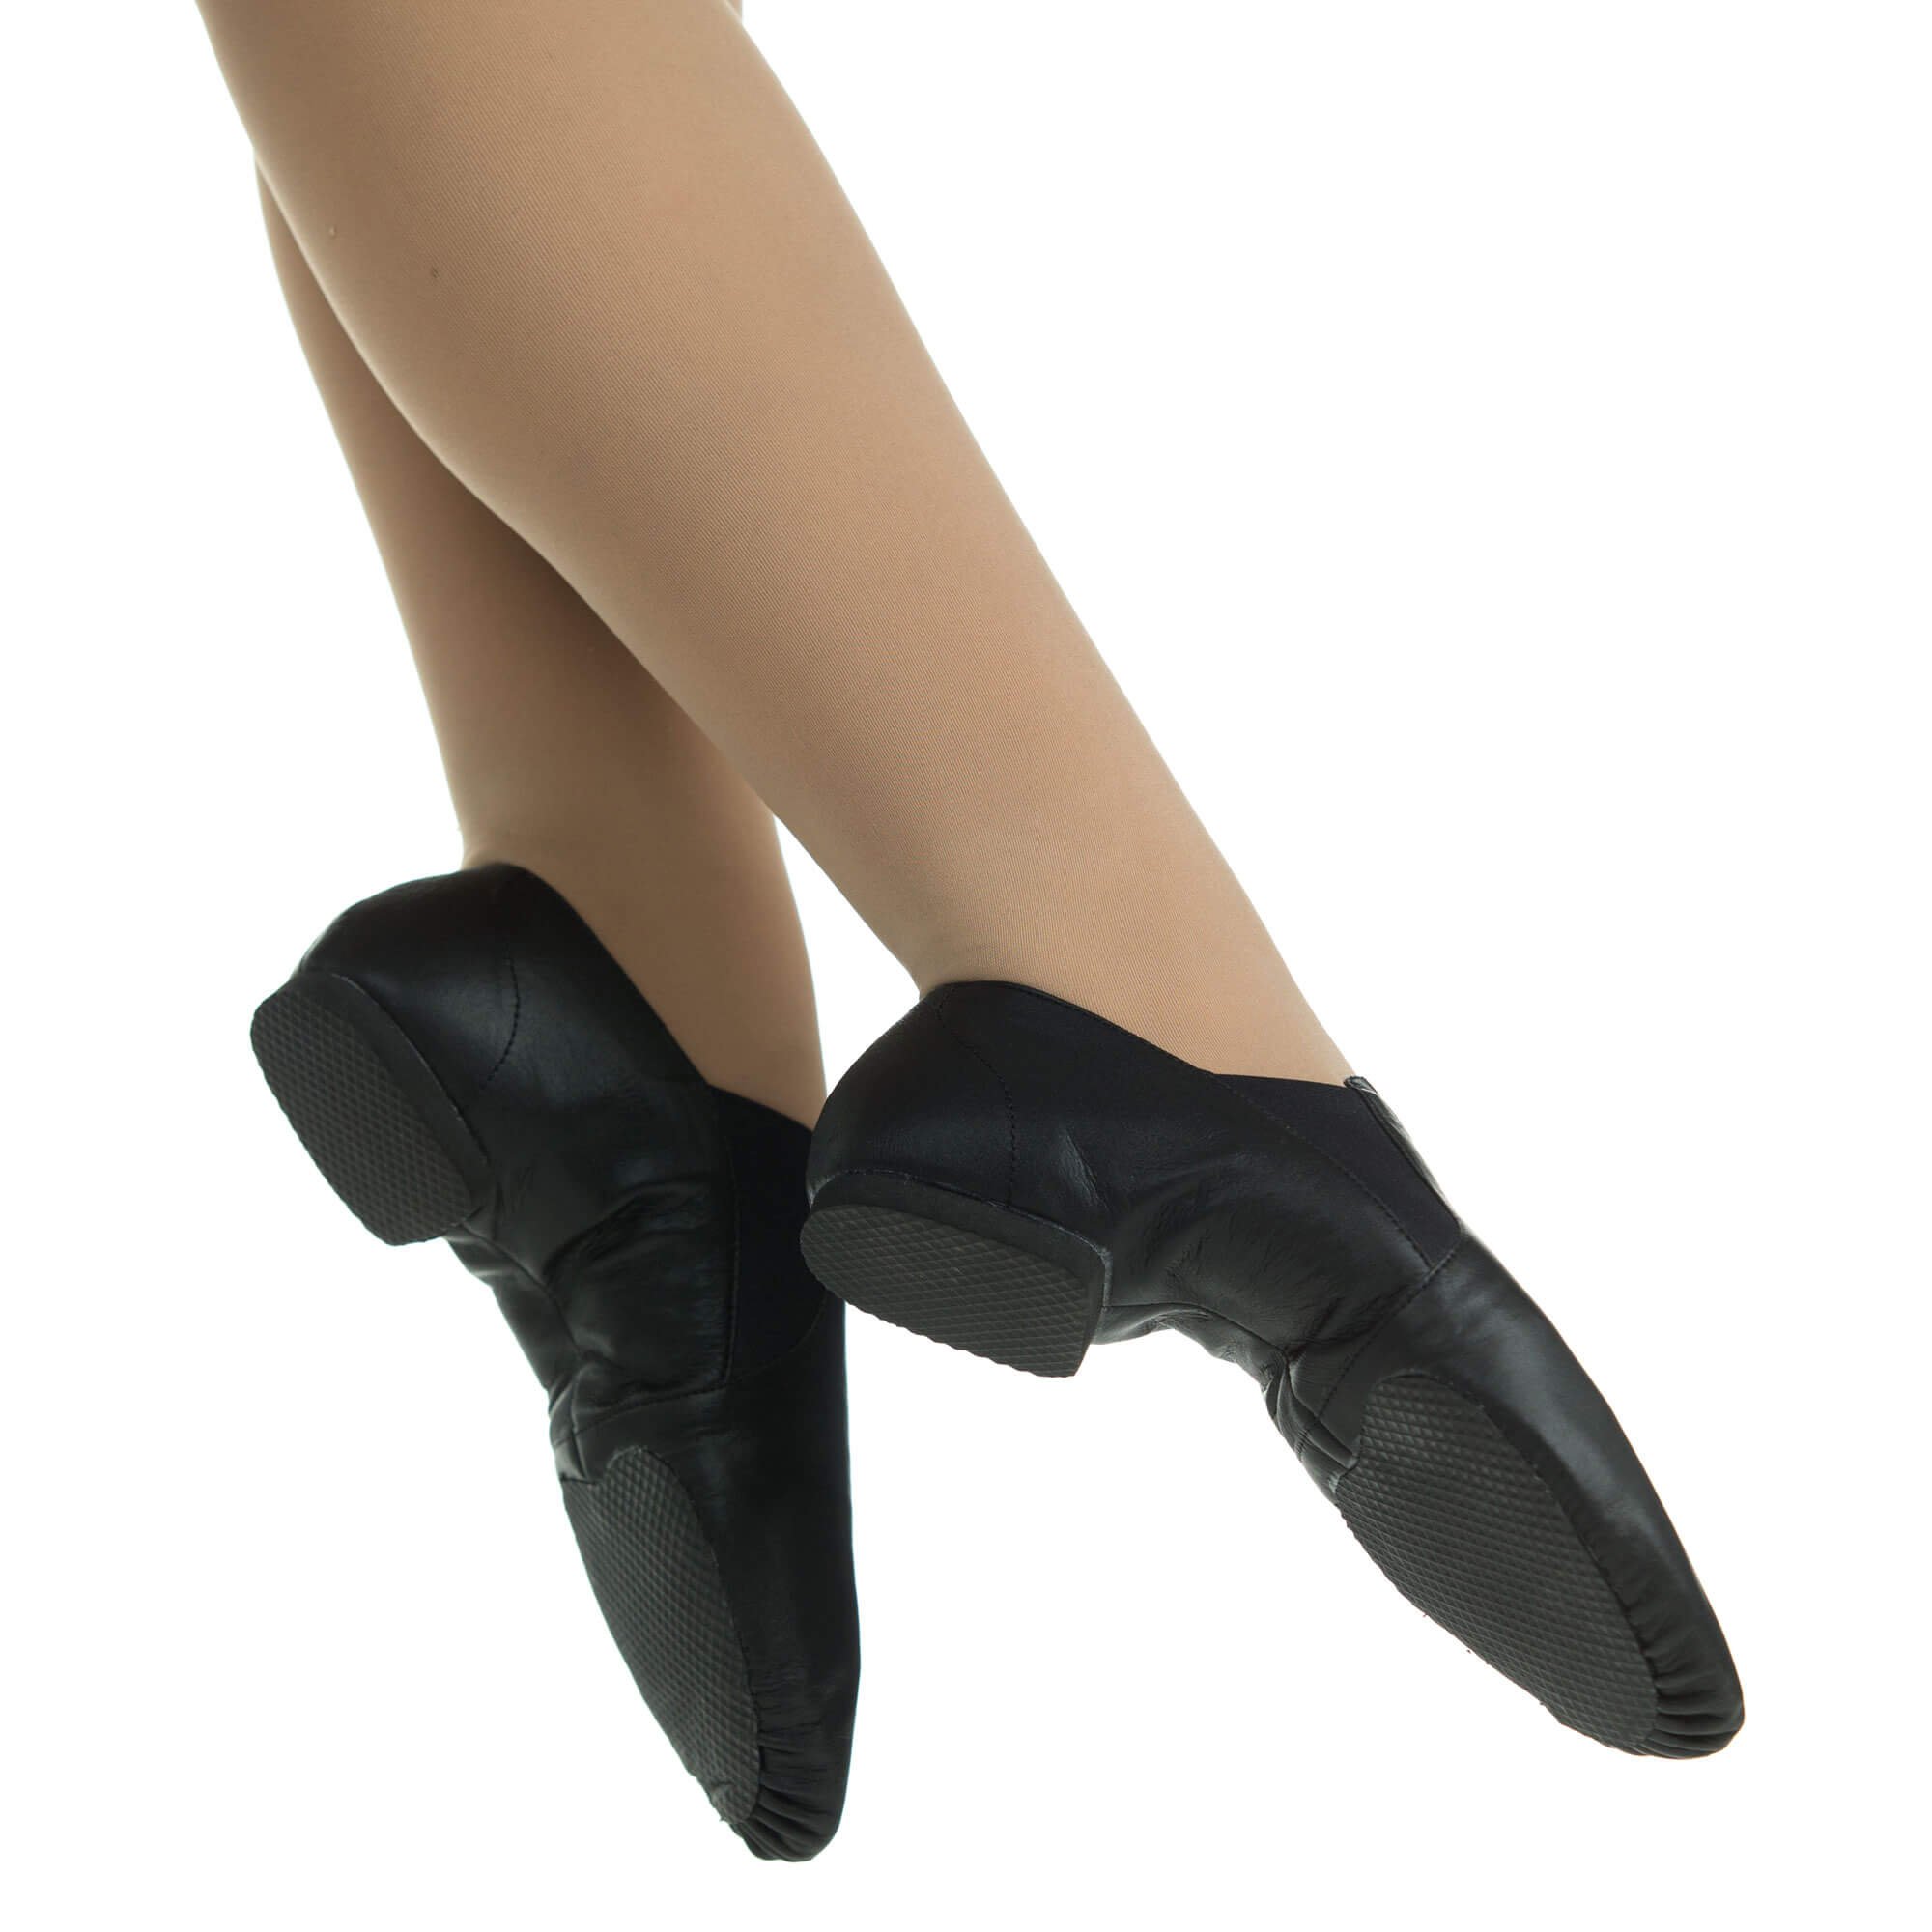 Danzcue Adult Dance Leather Jazz Bootie Shoes - Click Image to Close